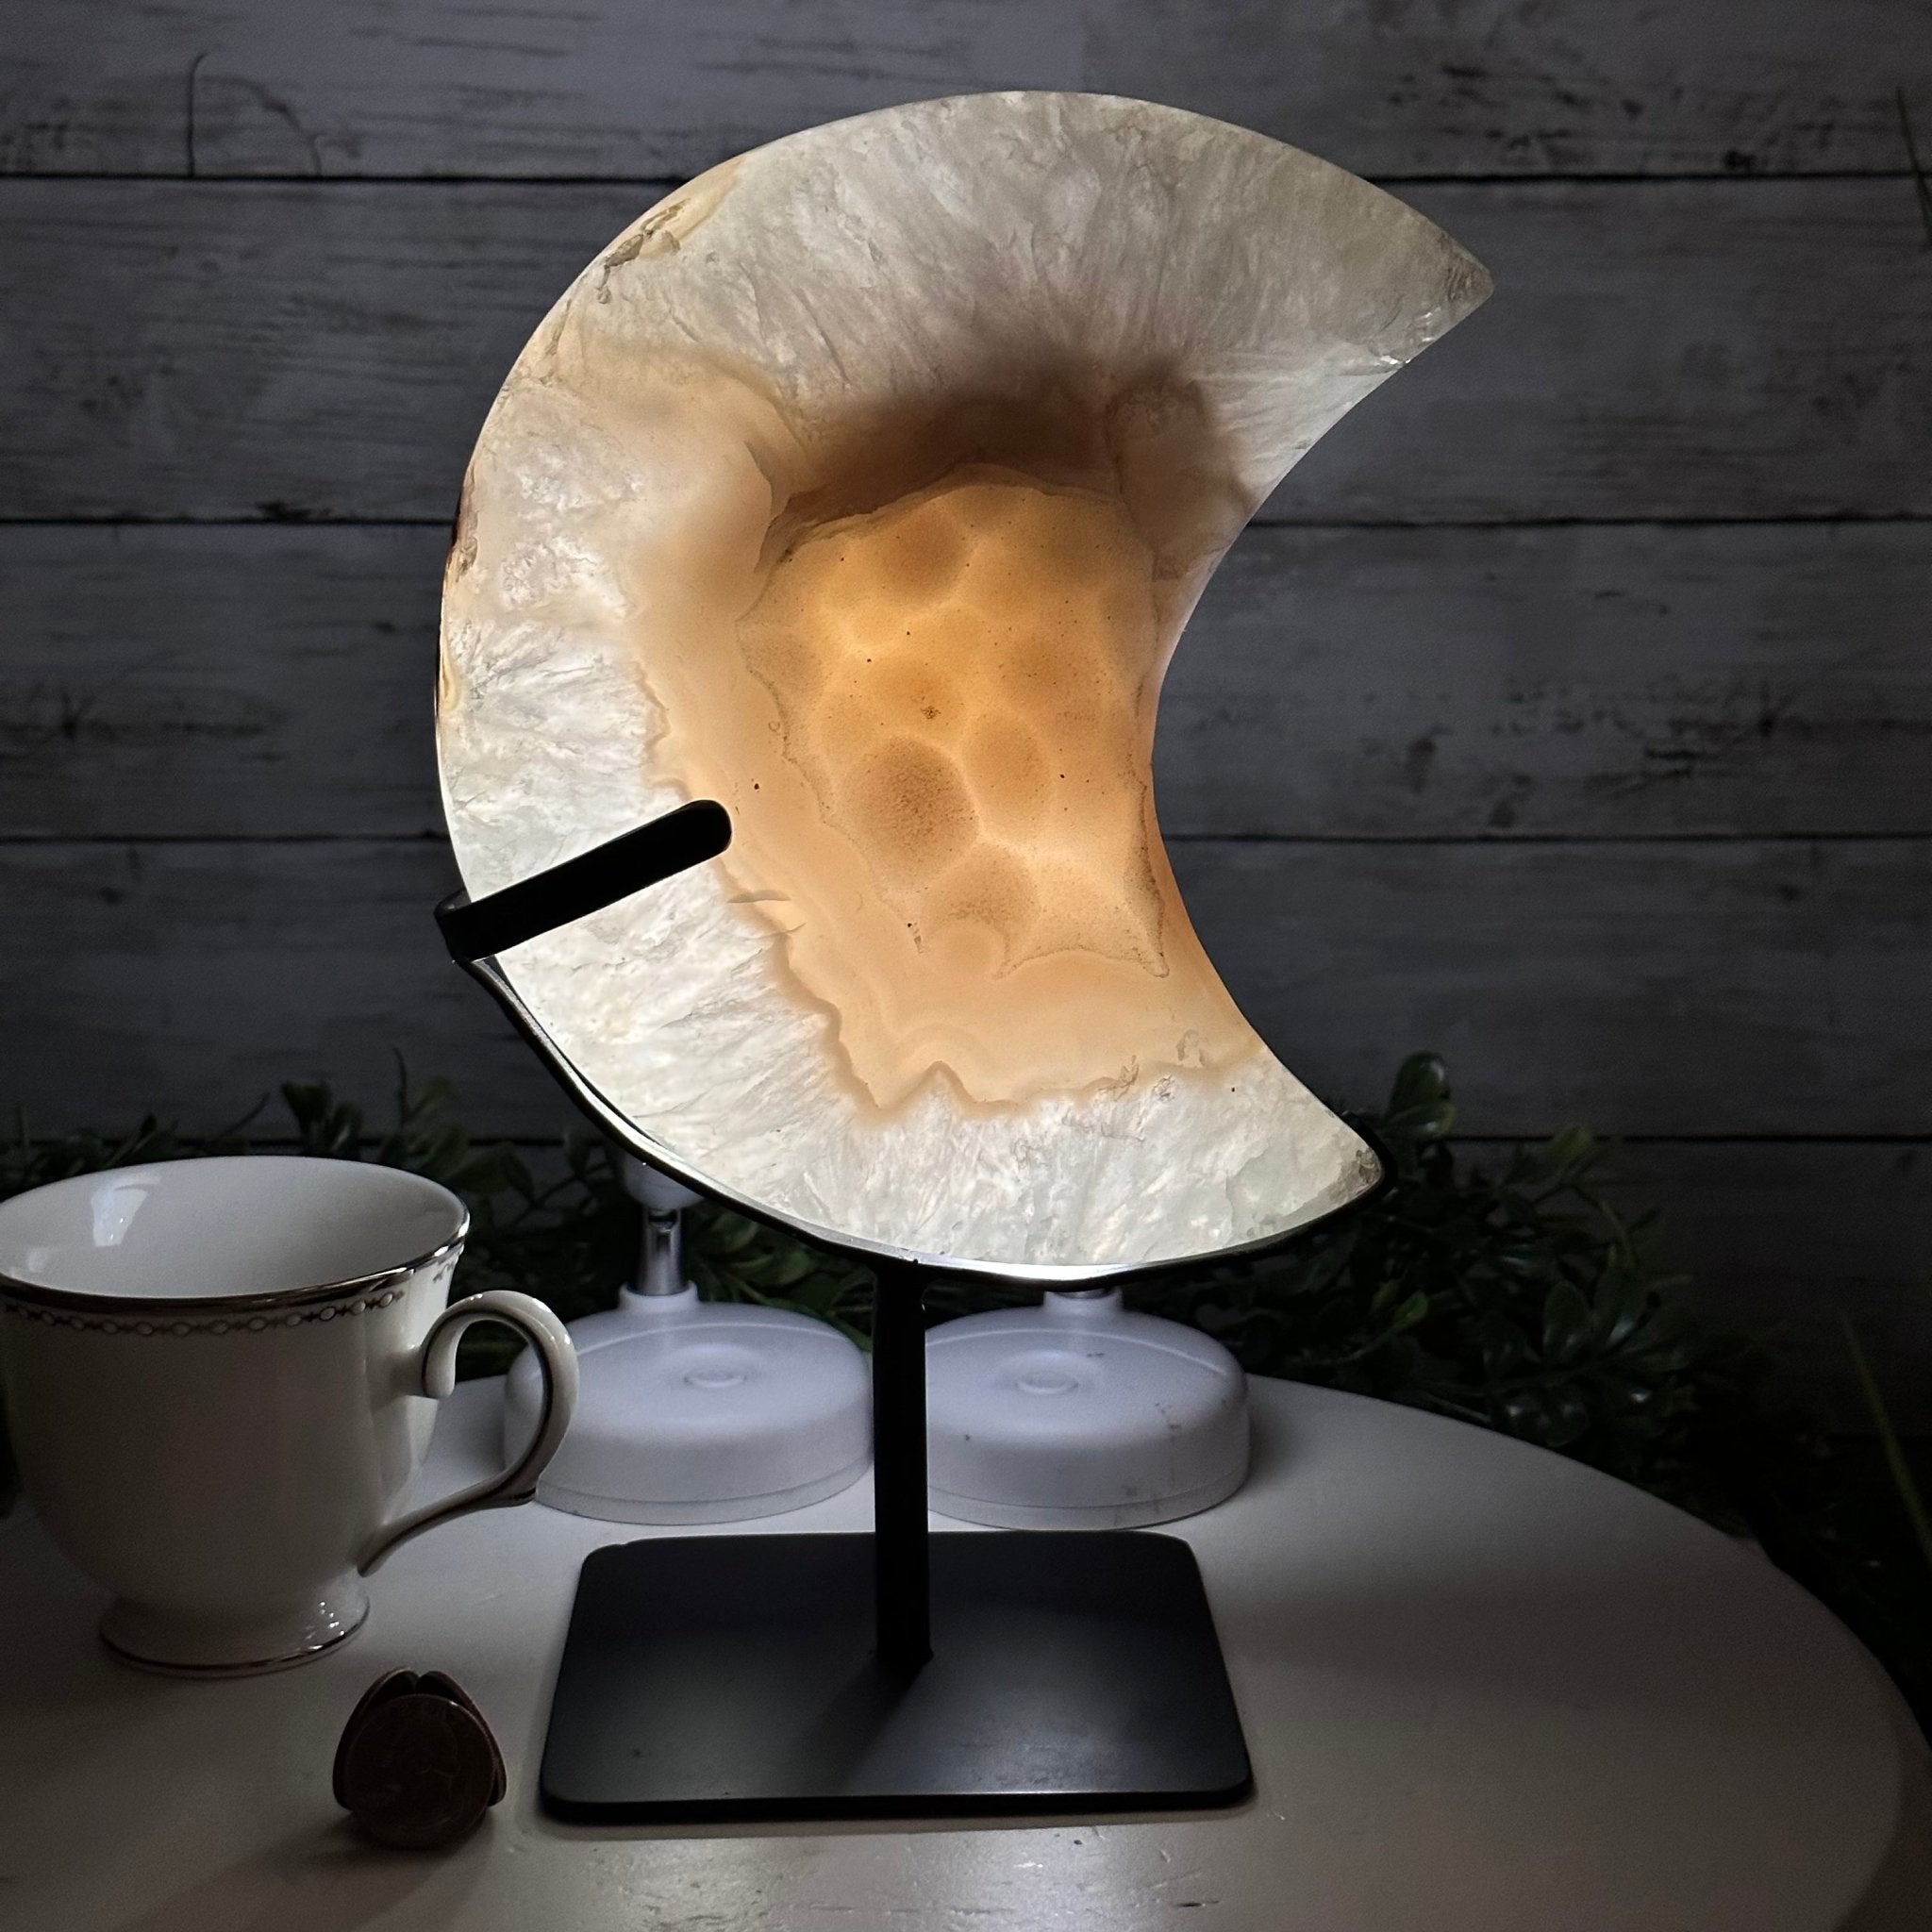 Polished Agate Crescent Moon on a Stand, 4.8 lbs & 11" Tall #5740NA-006 - Brazil GemsBrazil GemsPolished Agate Crescent Moon on a Stand, 4.8 lbs & 11" Tall #5740NA-006Crescent Moons5740NA-006